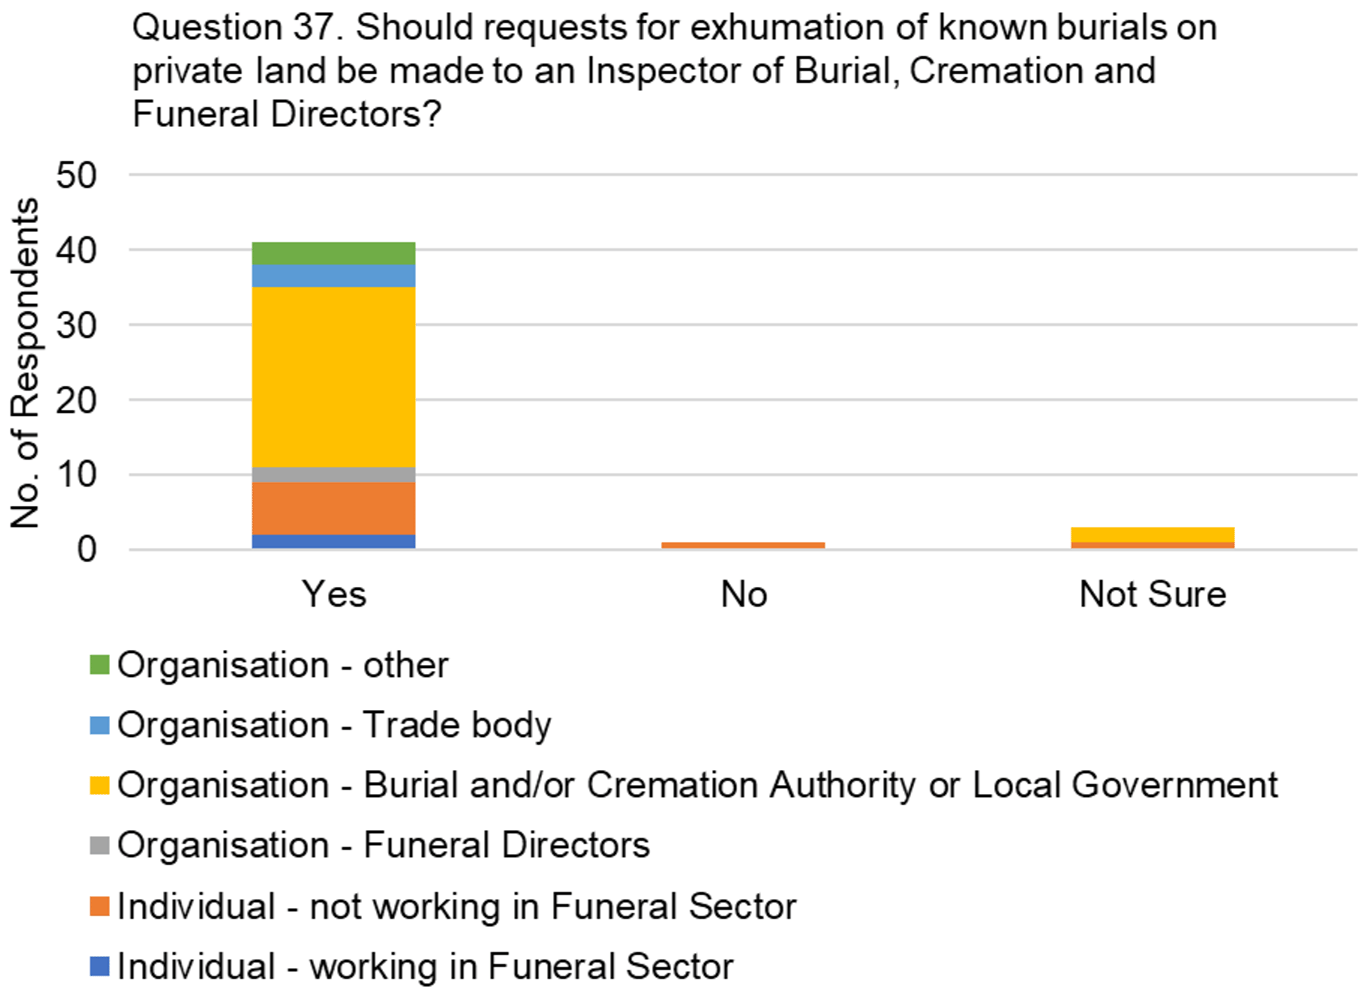 The graph visually presents the data from table 26, focussing on the responses to the question, "Should requests for exhumation of known burials on private land be made to an Inspector of Burial, Cremation and Funeral Directors?"